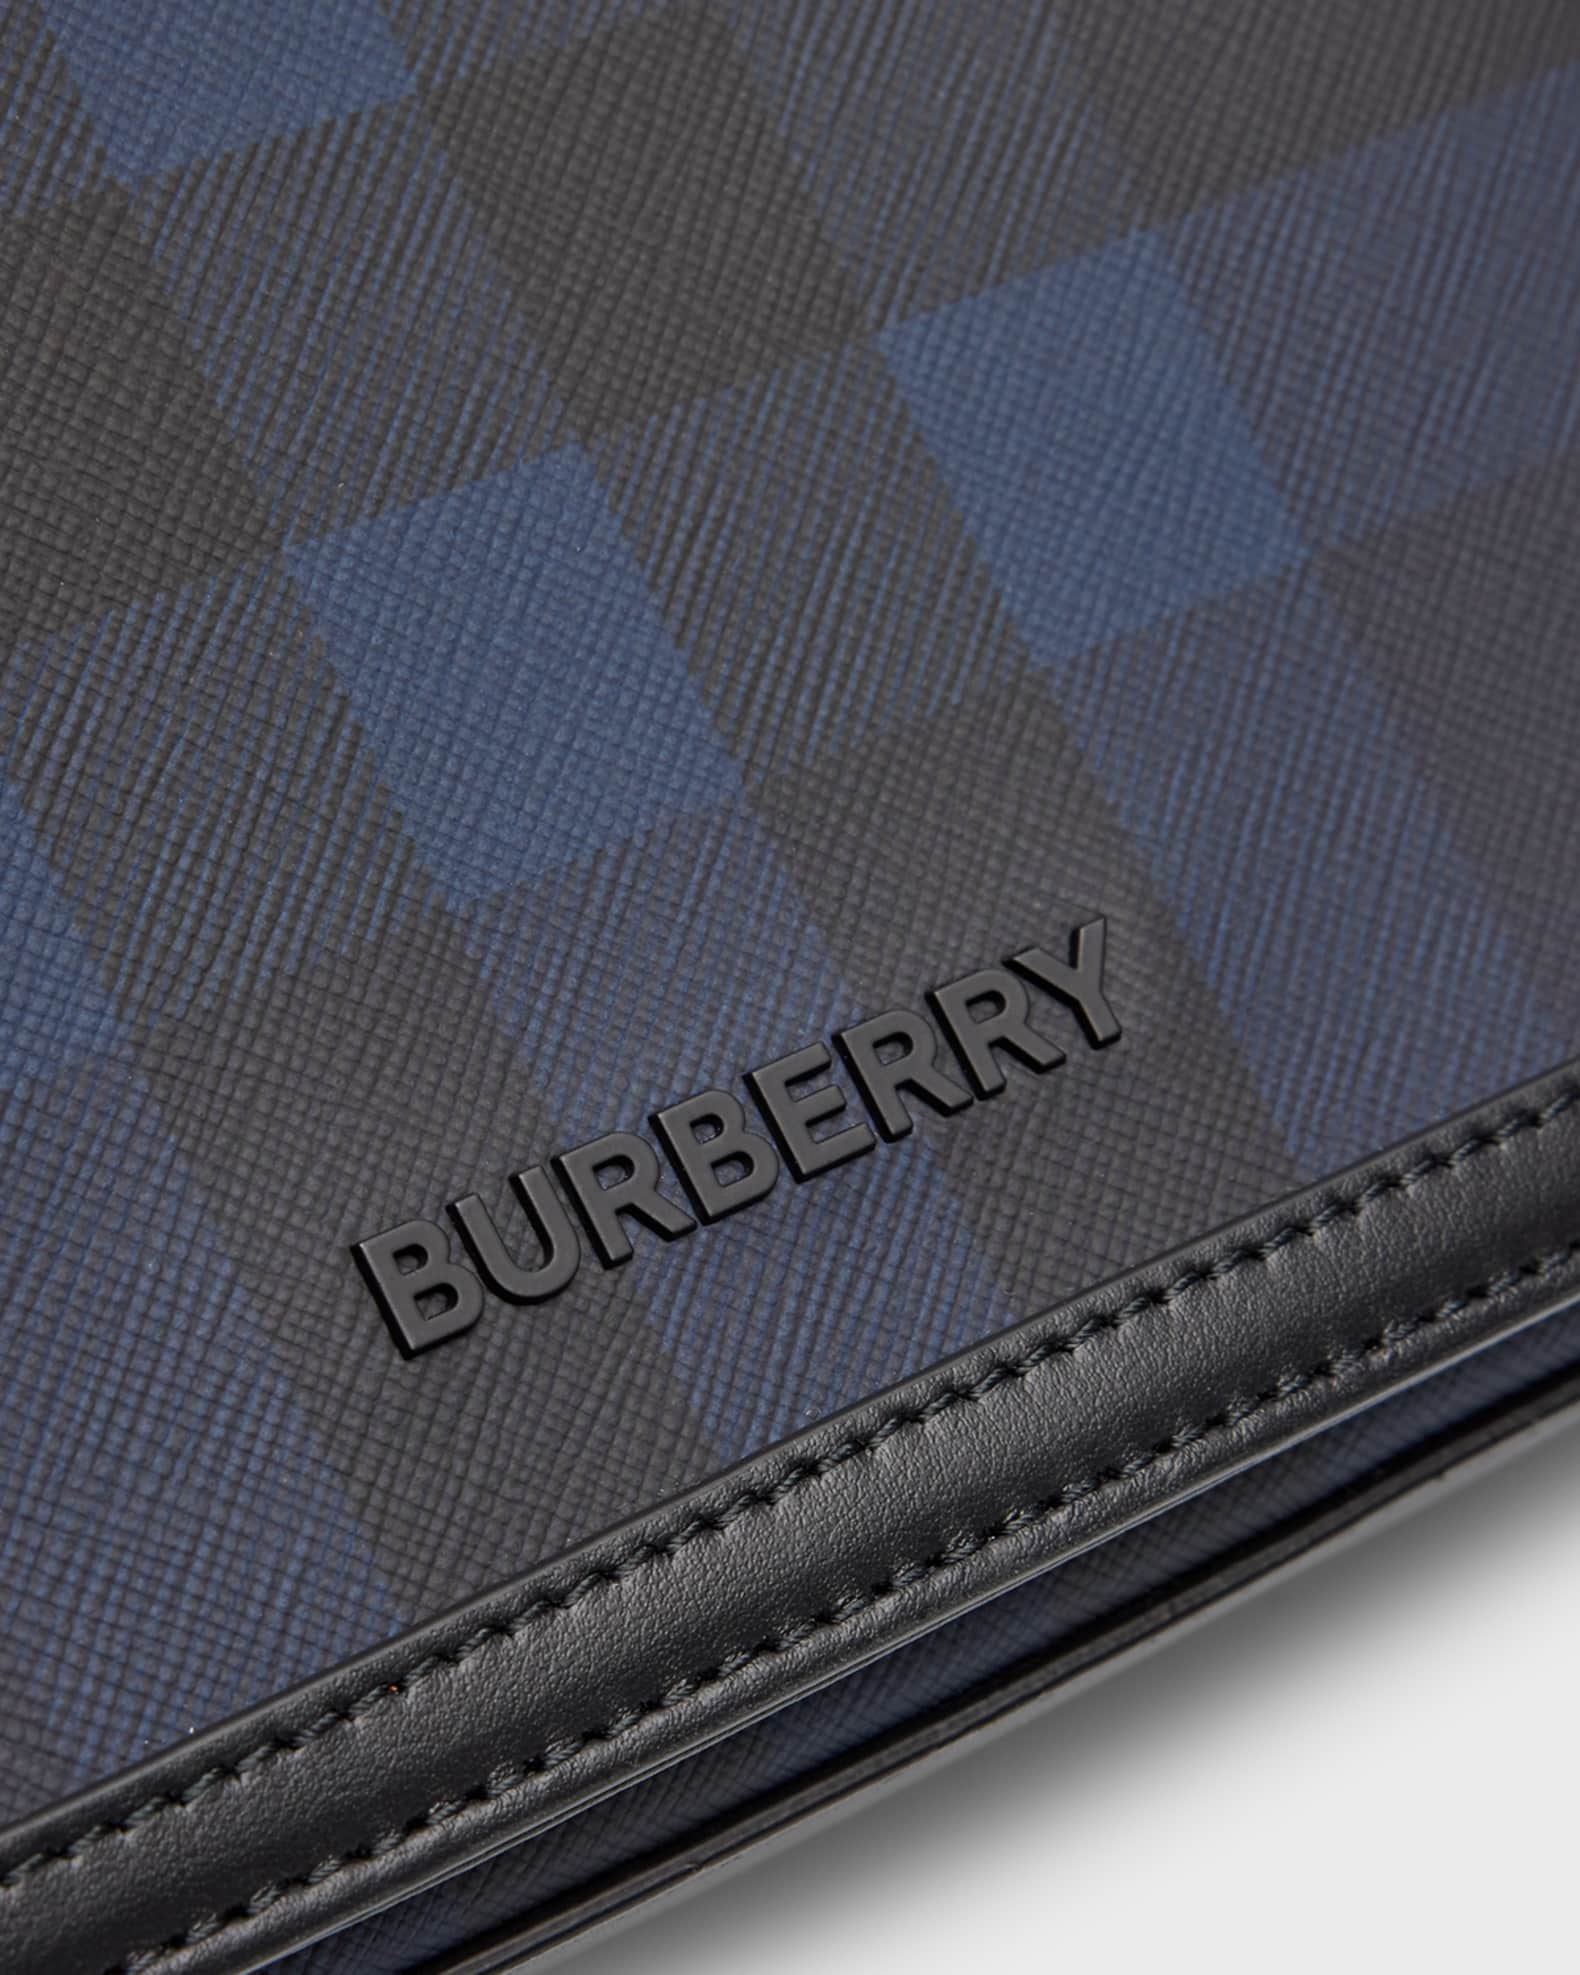 Burberry Small 'Alfred' Messenger Bag